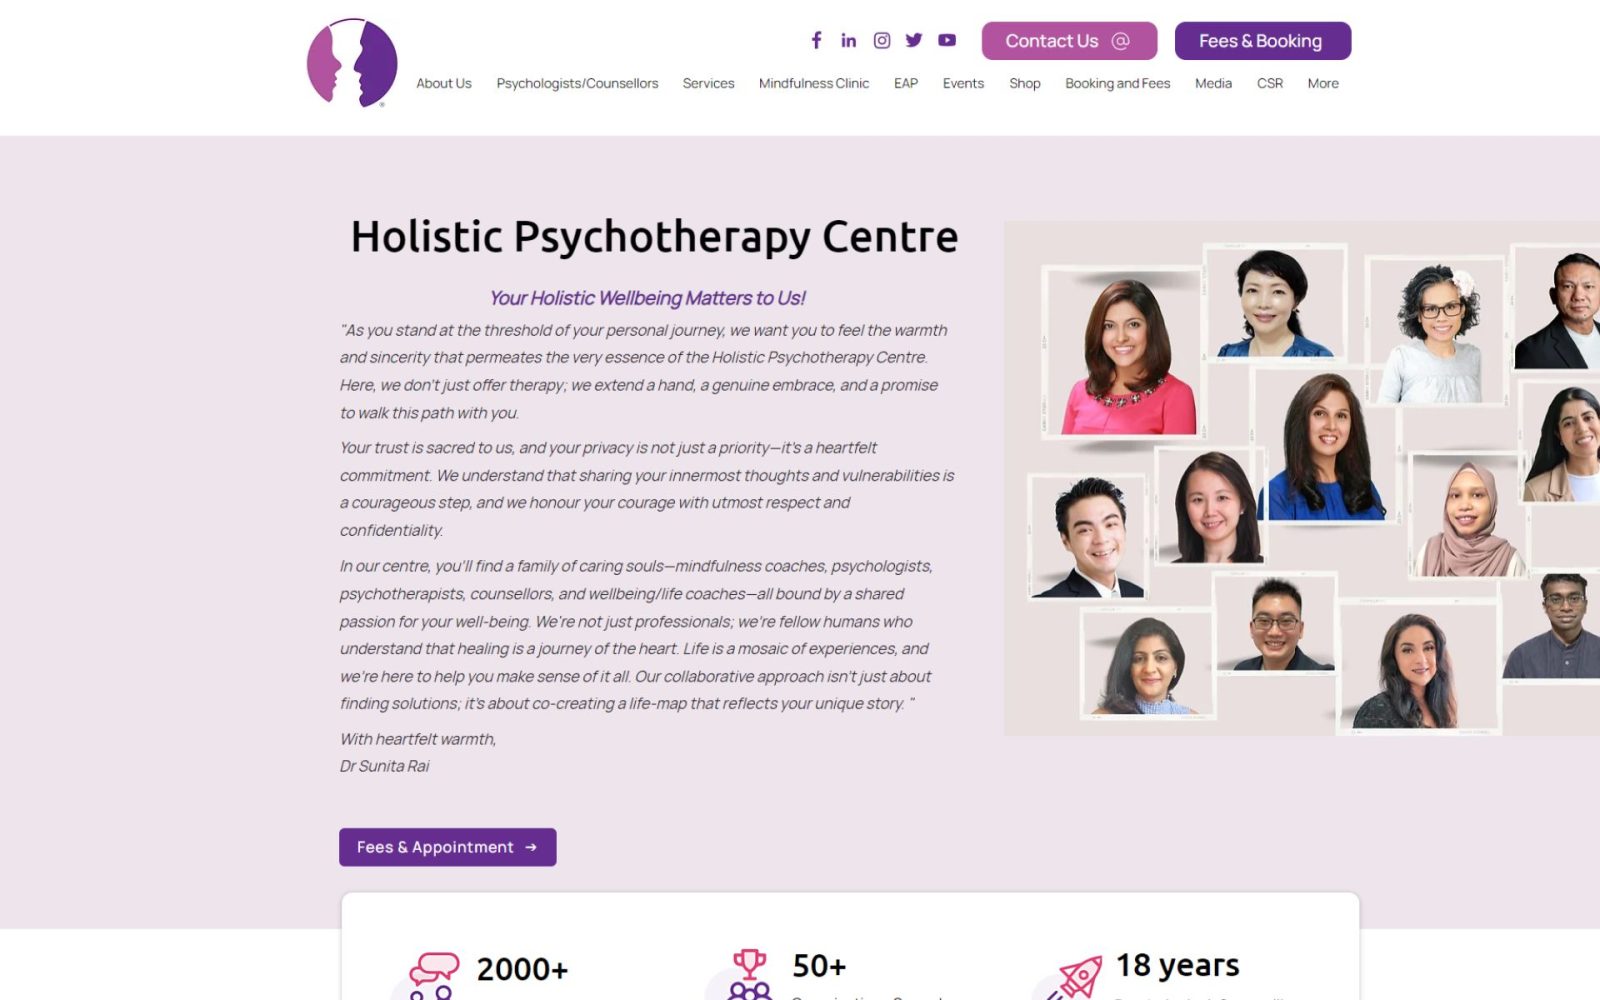 Holistic Psychotherapy Centre